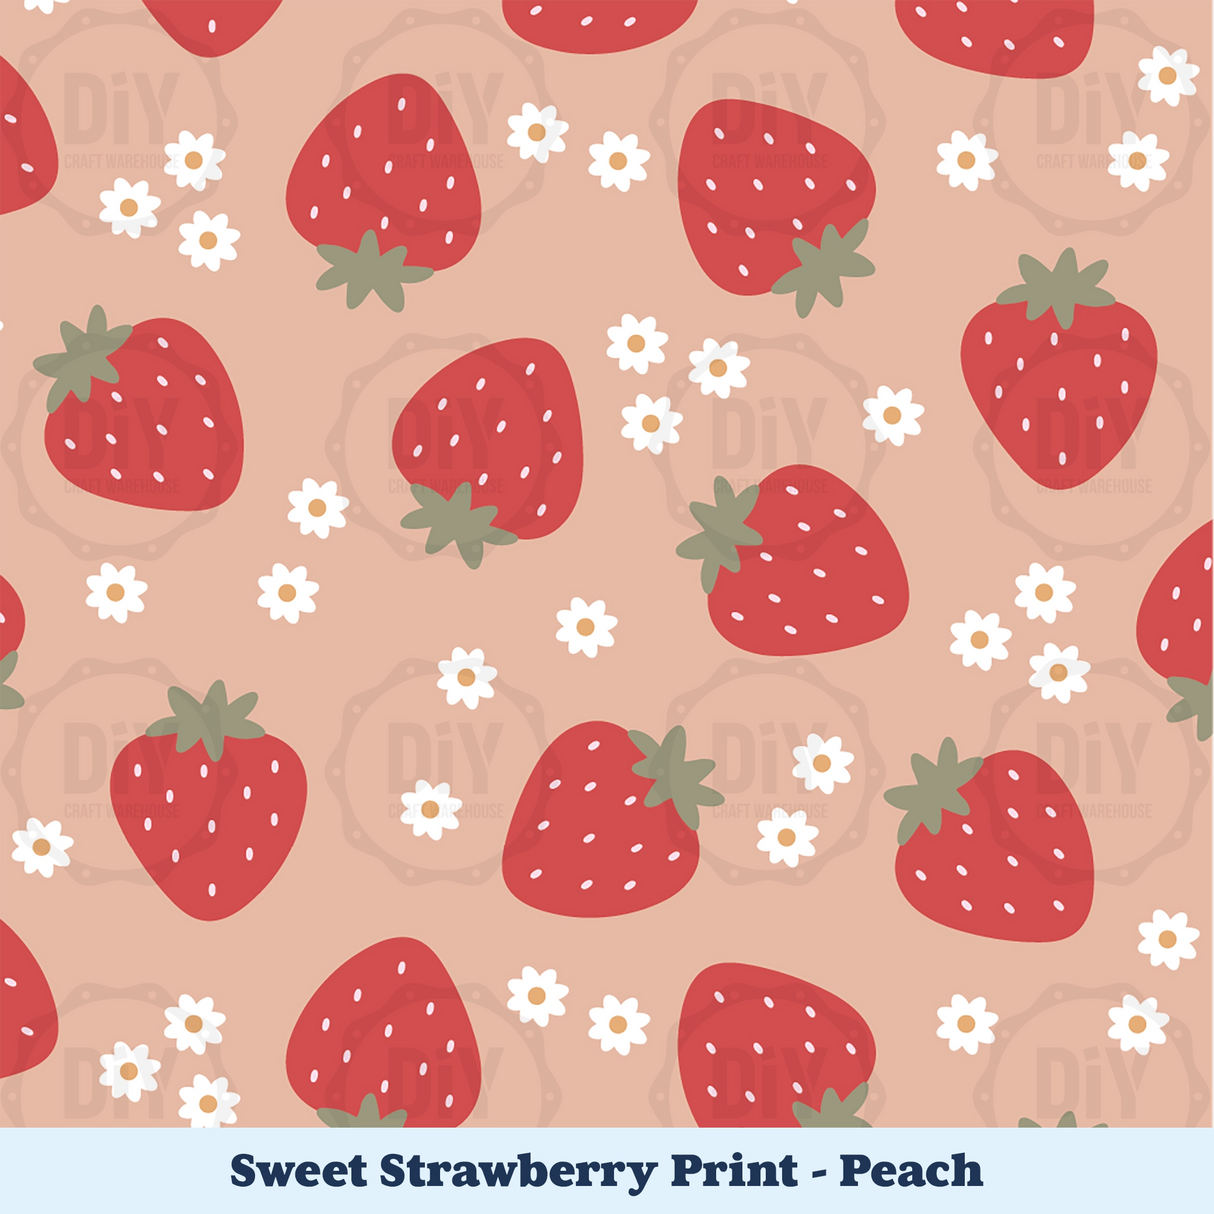 Sweet Strawberry Sublimation Transfer - Peach